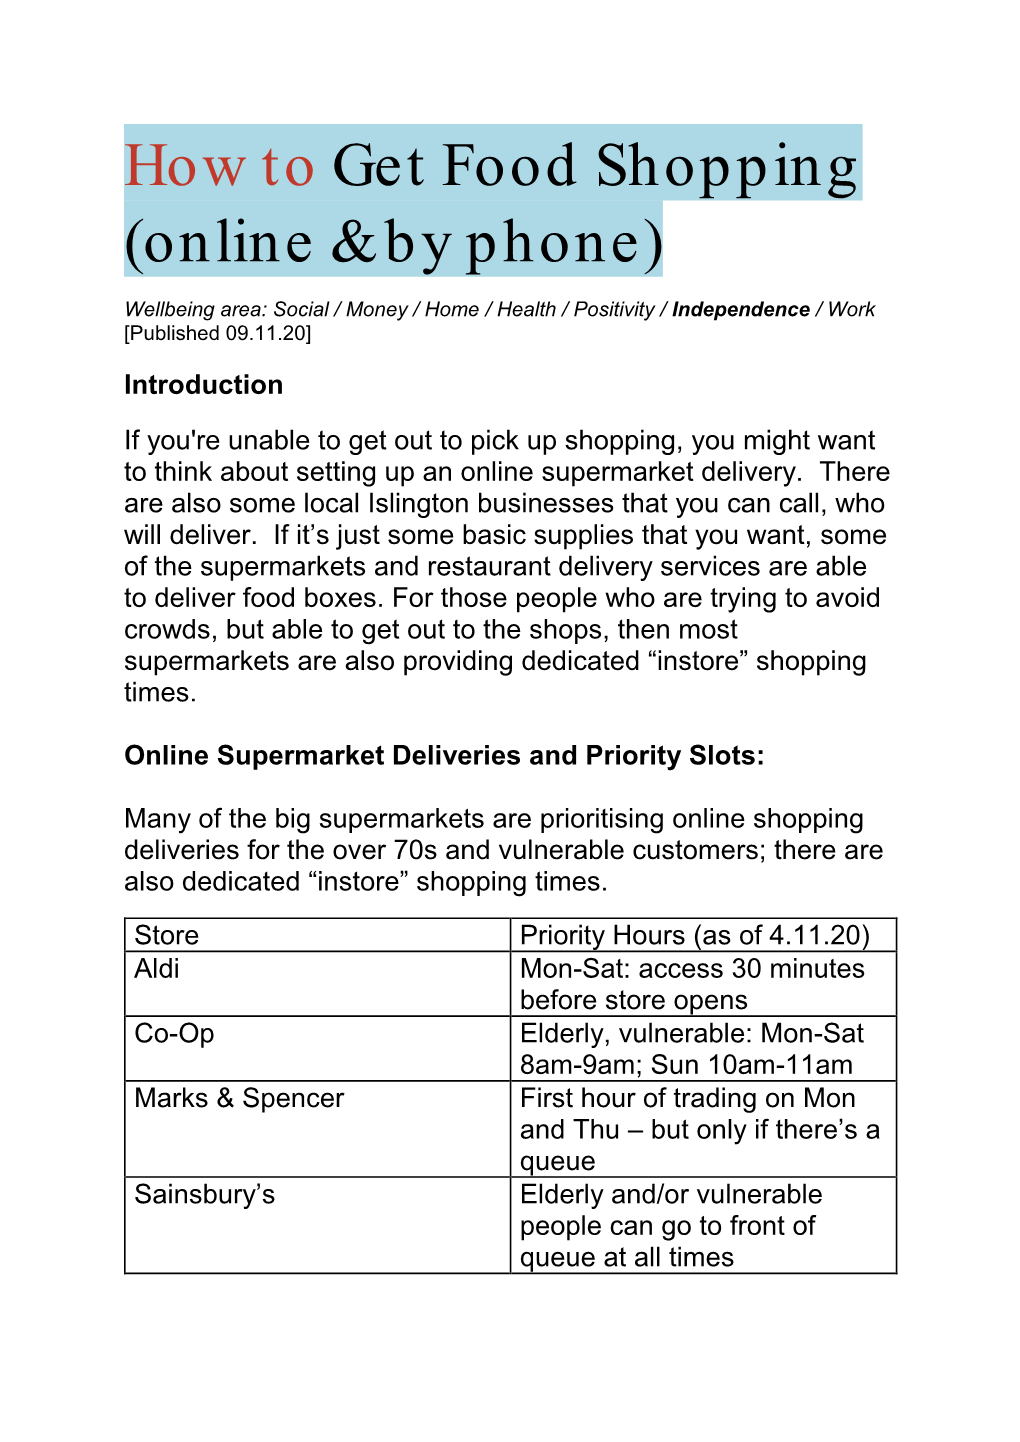 How to Get Food Shopping (Online & by Phone)